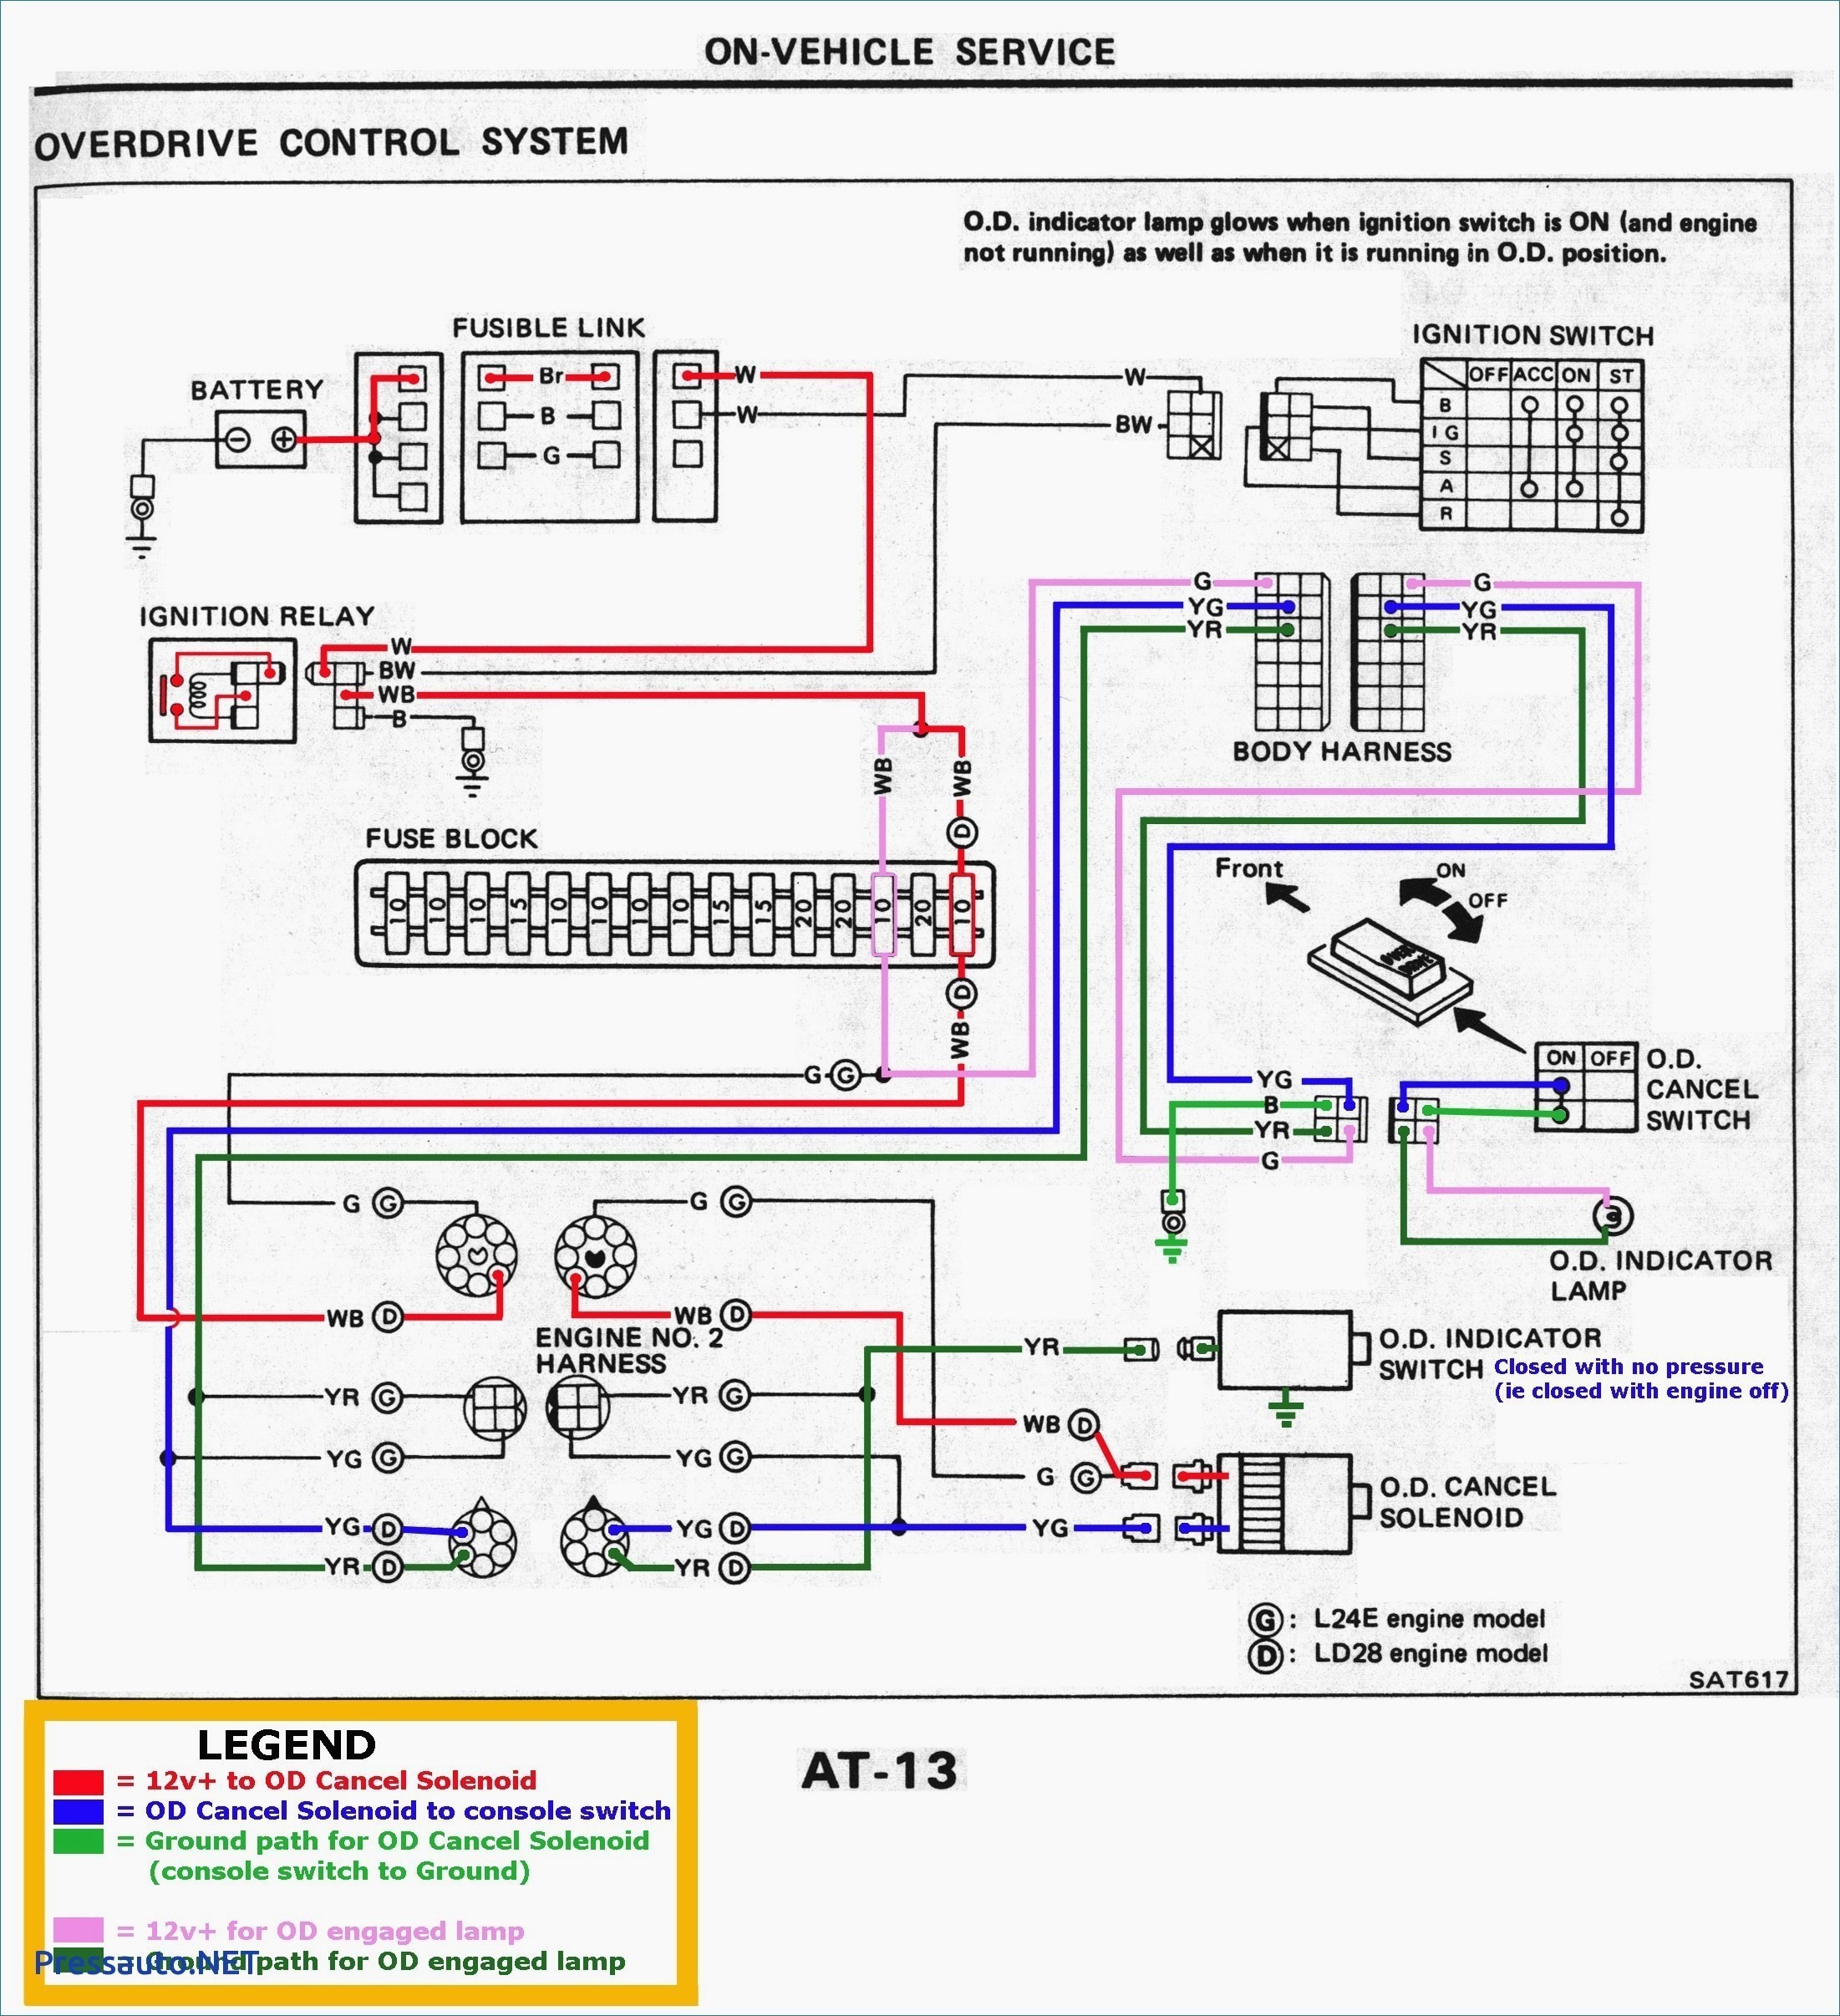 Wiring Diagram For an Rv Generator Recent An Generator Wiring Diagram Best Simple Wiring Diagram